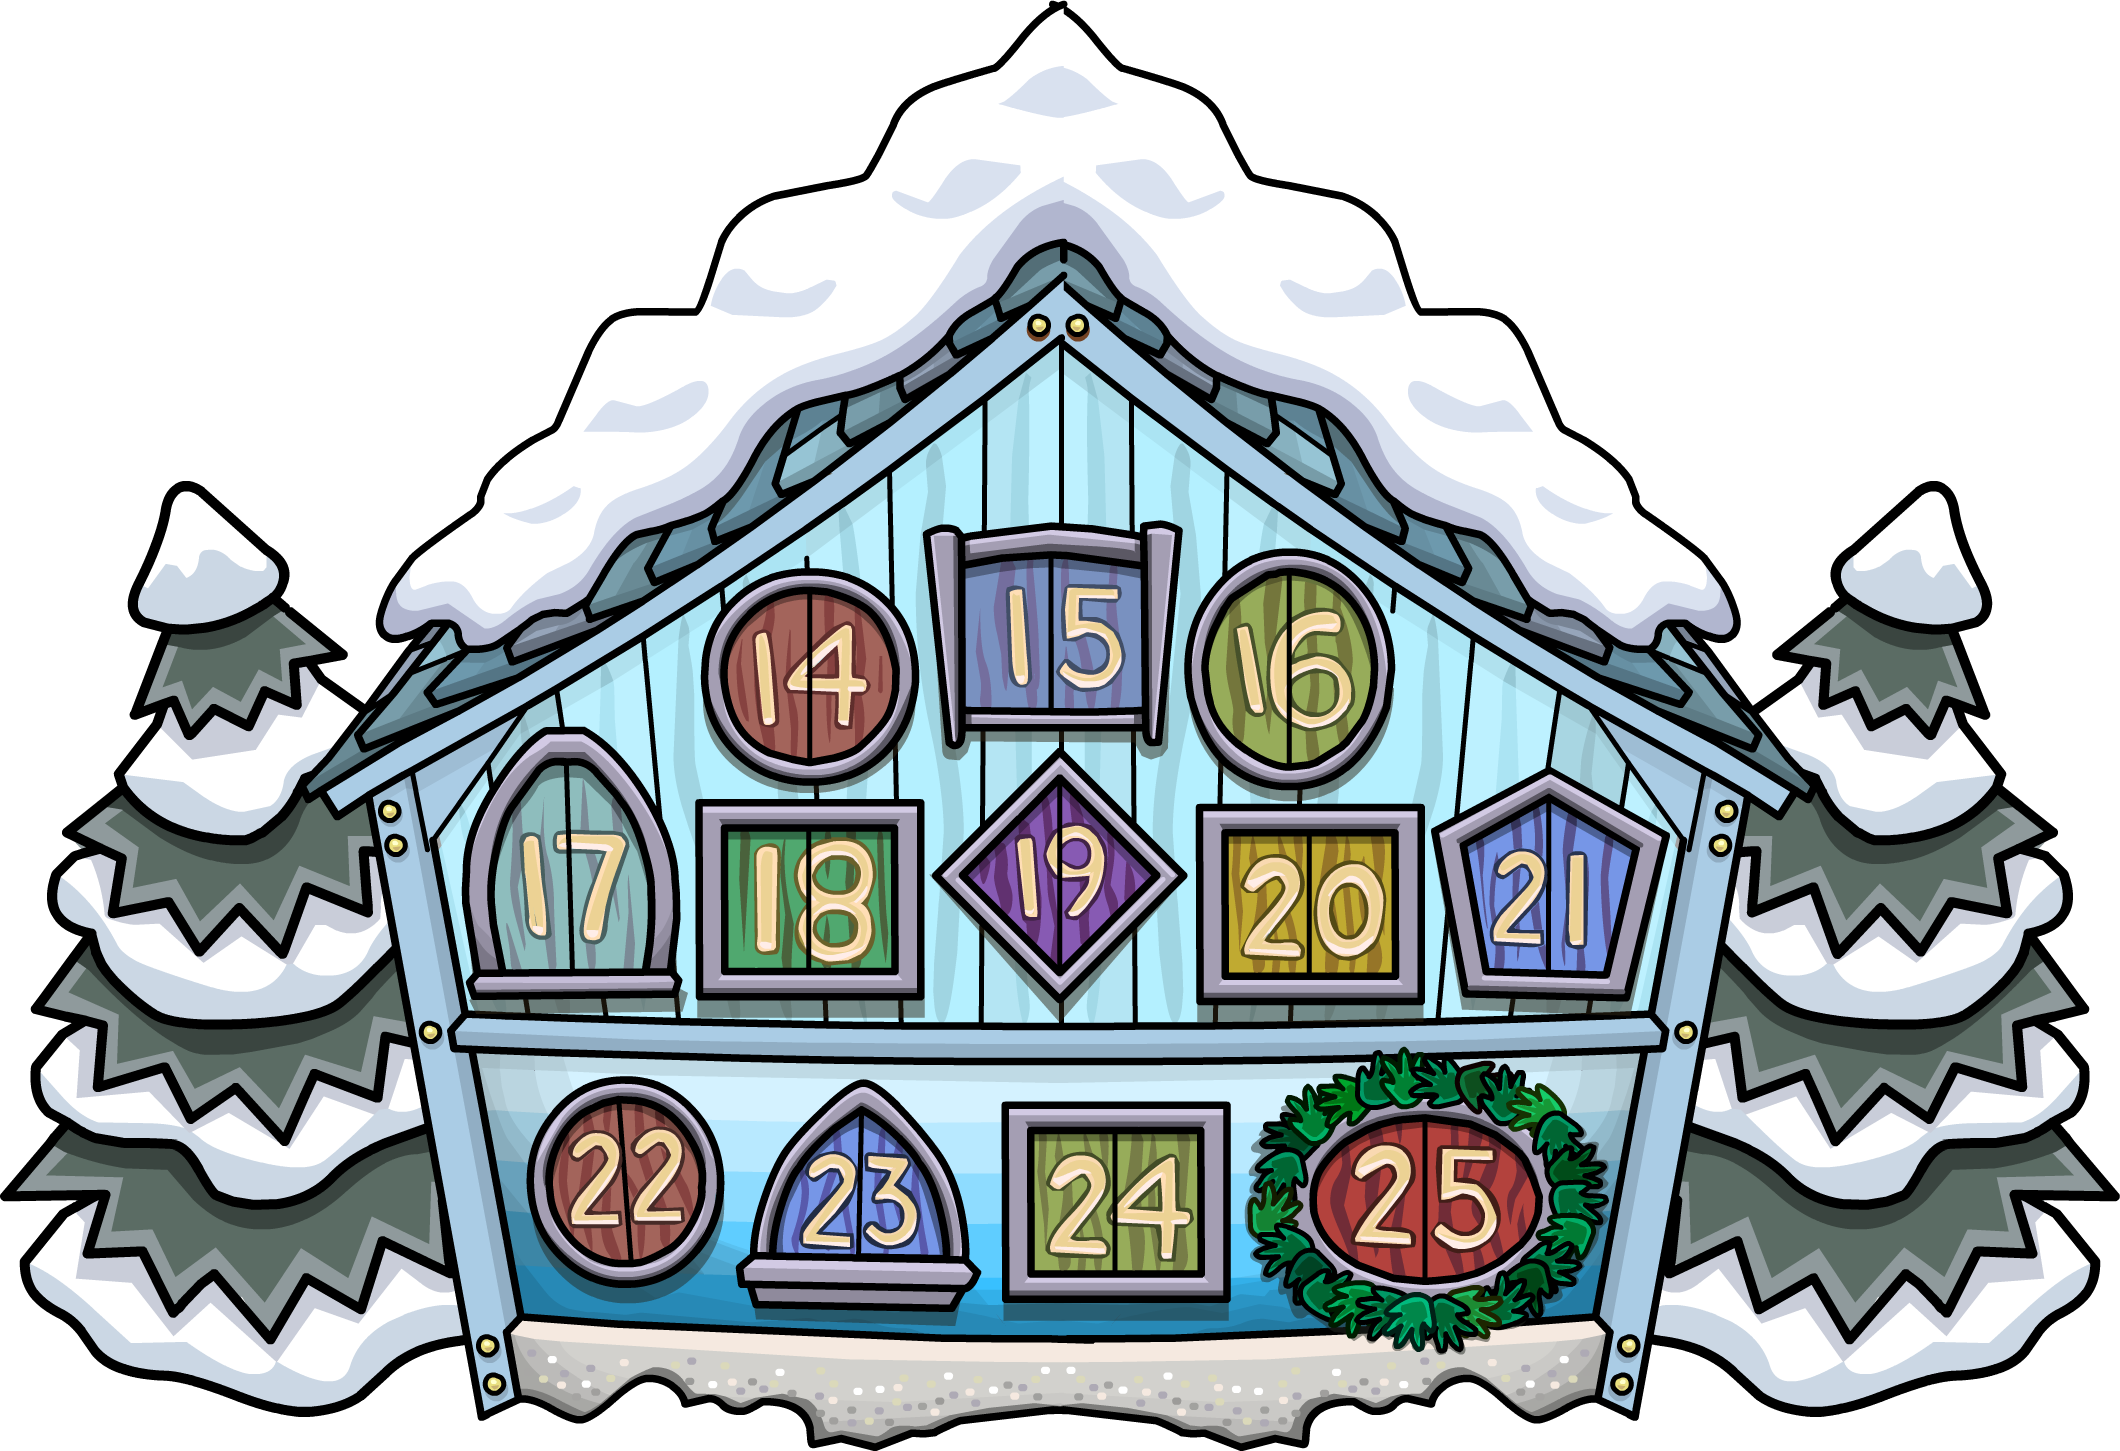 https://static.wikia.nocookie.net/club-penguin-rewritten/images/3/3e/Advent_Calendar_2018.png/revision/latest?cb=20181217075503